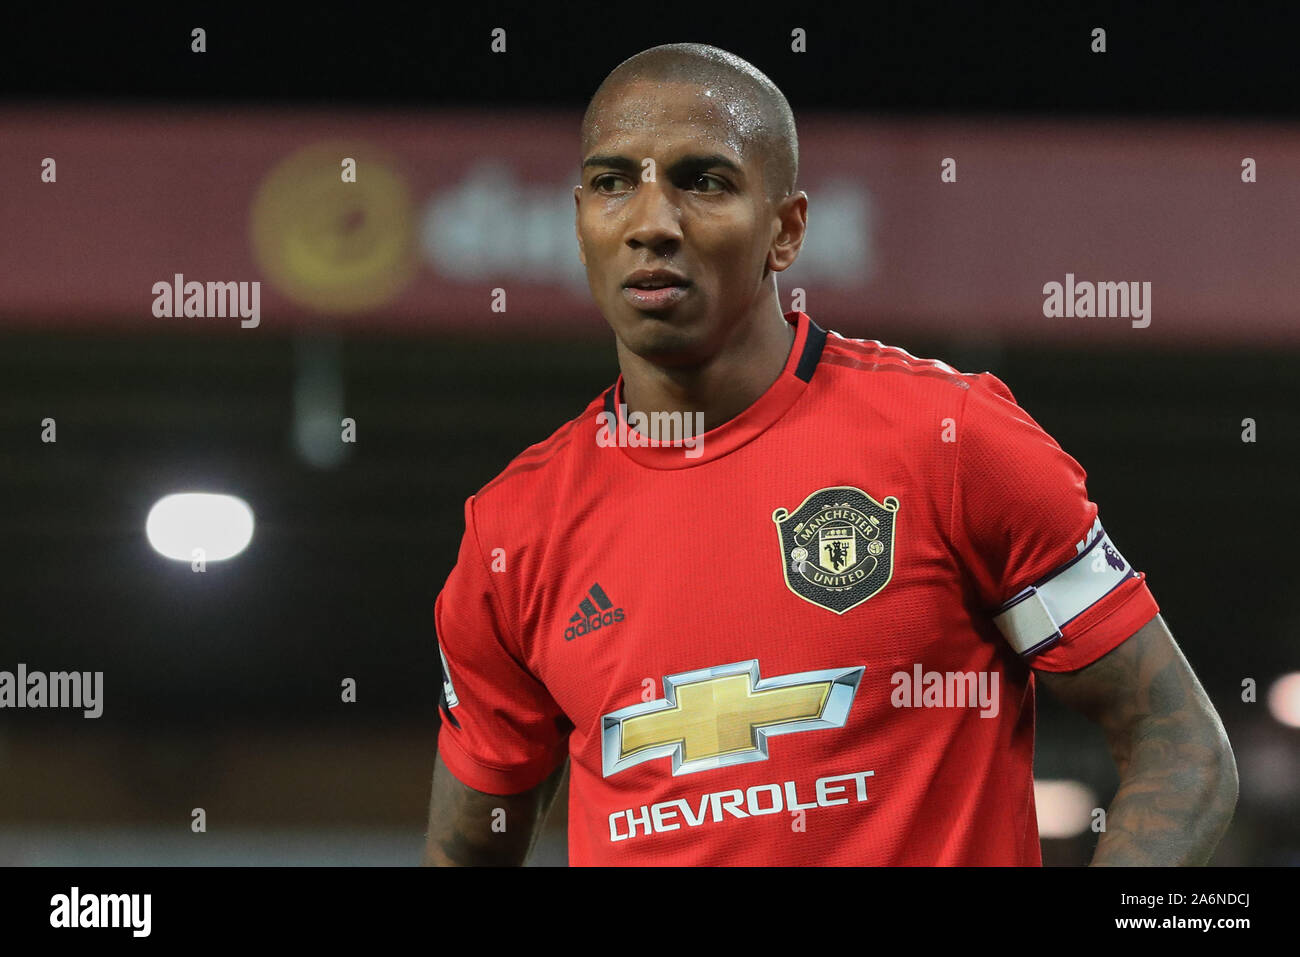 27th October 2019, Carrow Road, Norwich, England; Premier League, Norwich City v Manchester United : Ashley Young (18) of Manchester United during the game Credit: Mark Cosgrove/News Images Stock Photo